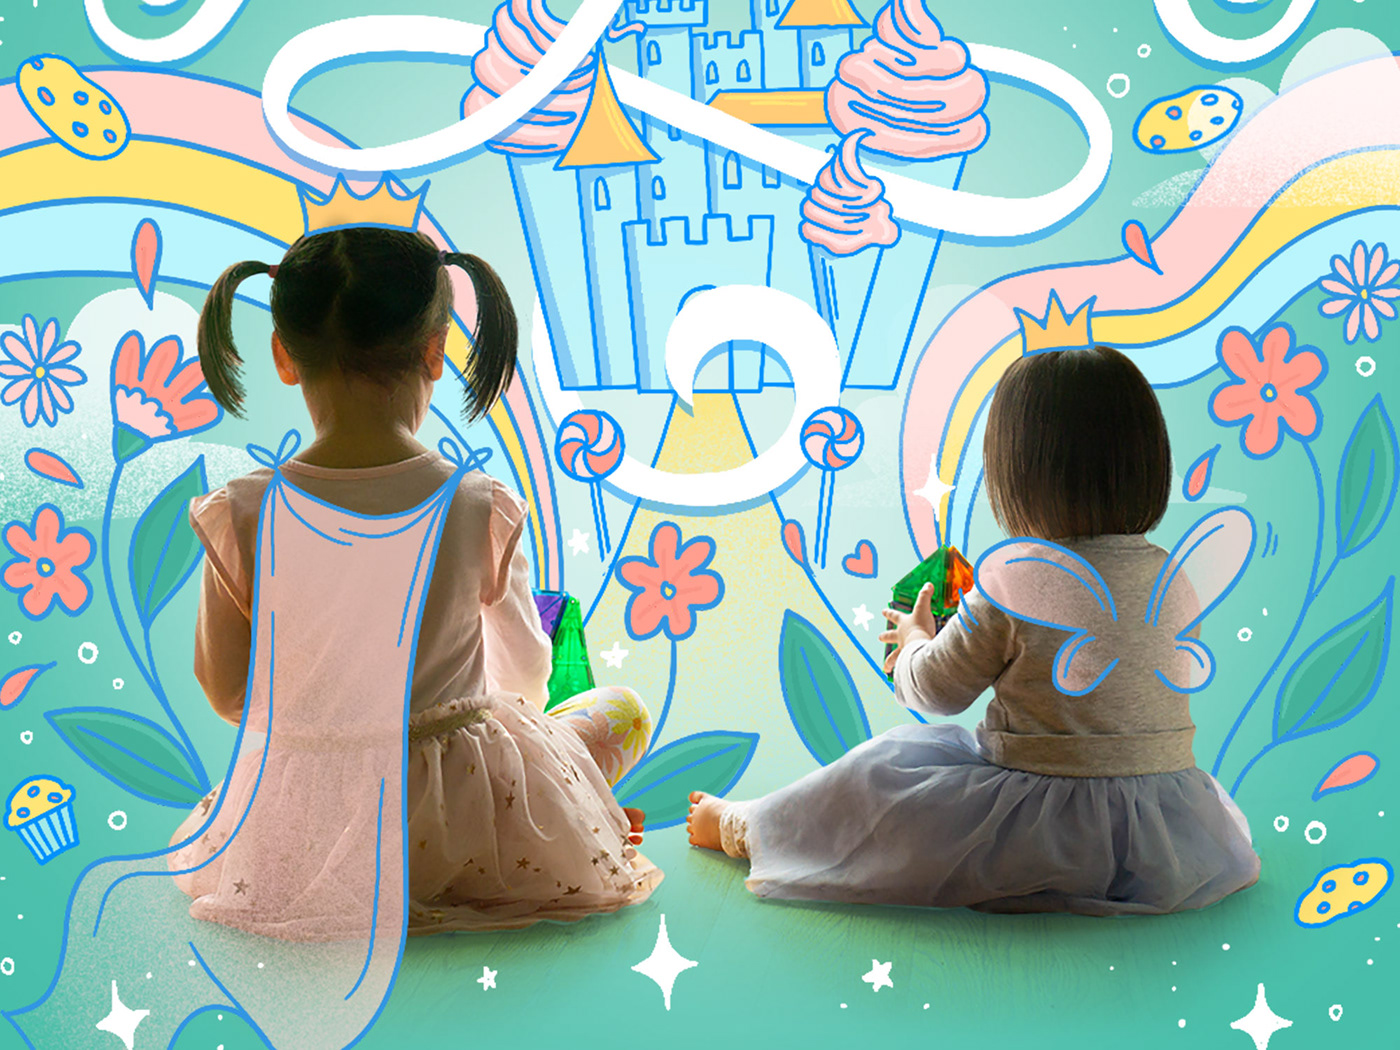 Magical digital illustration on photo of two girls playing in an imaginary world